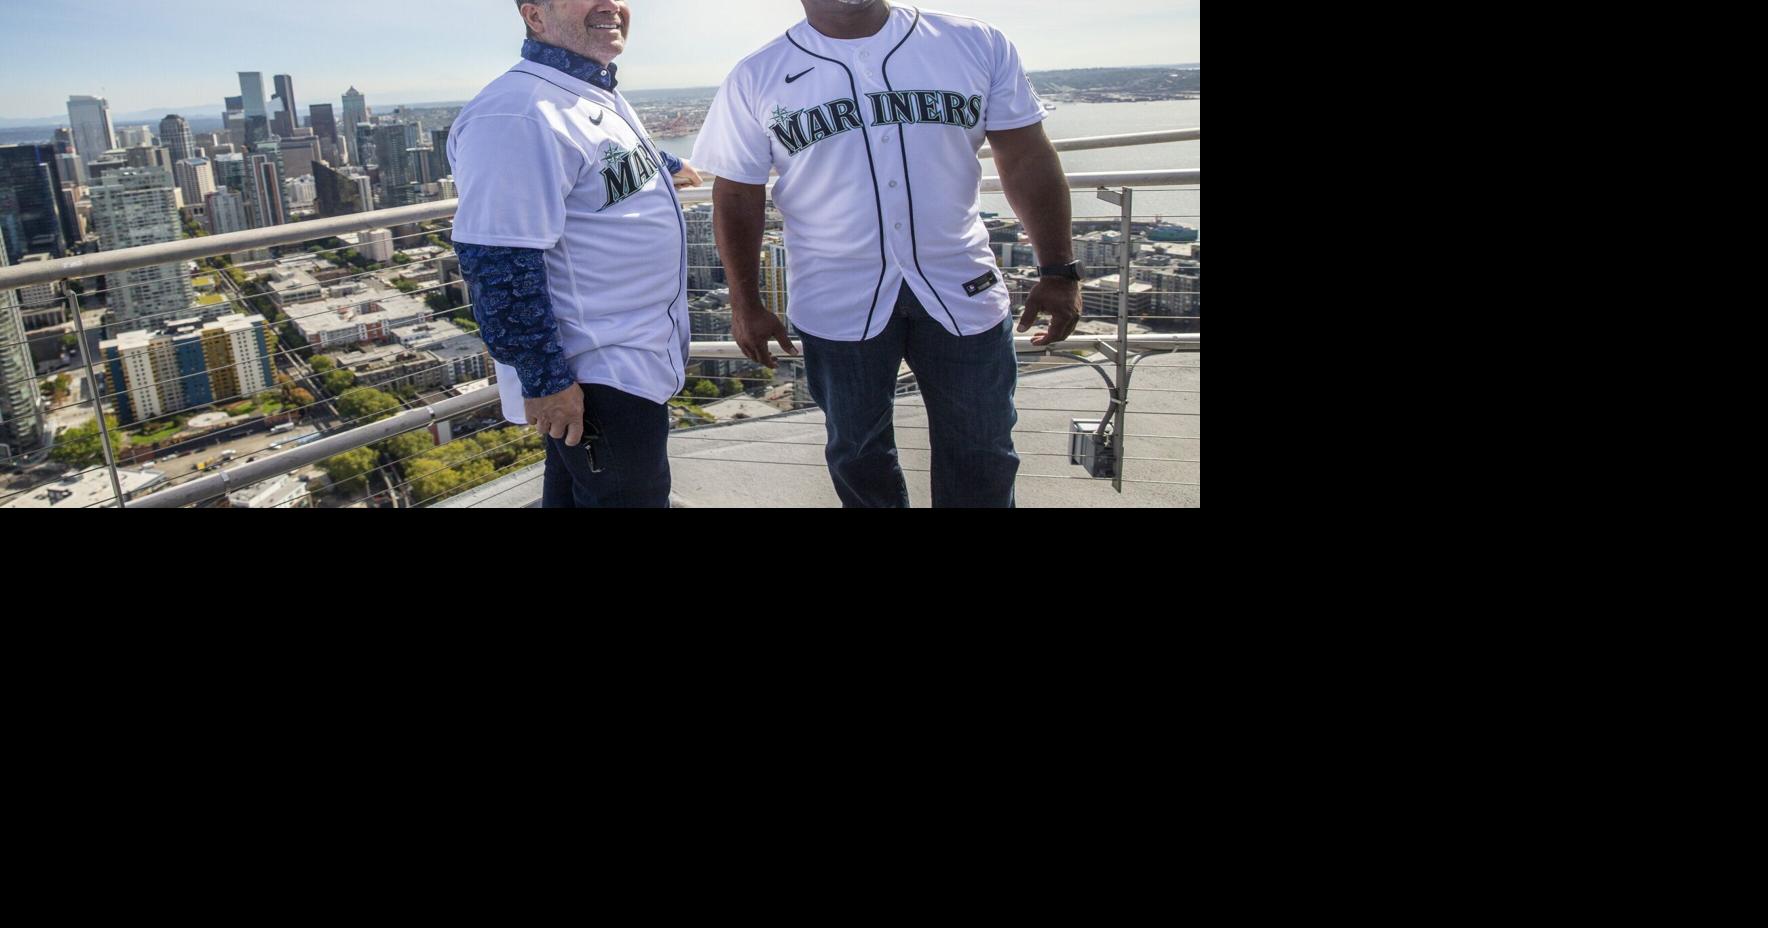 With Griffey's help, MLB hosts HBCU All-Star Game - The Columbian